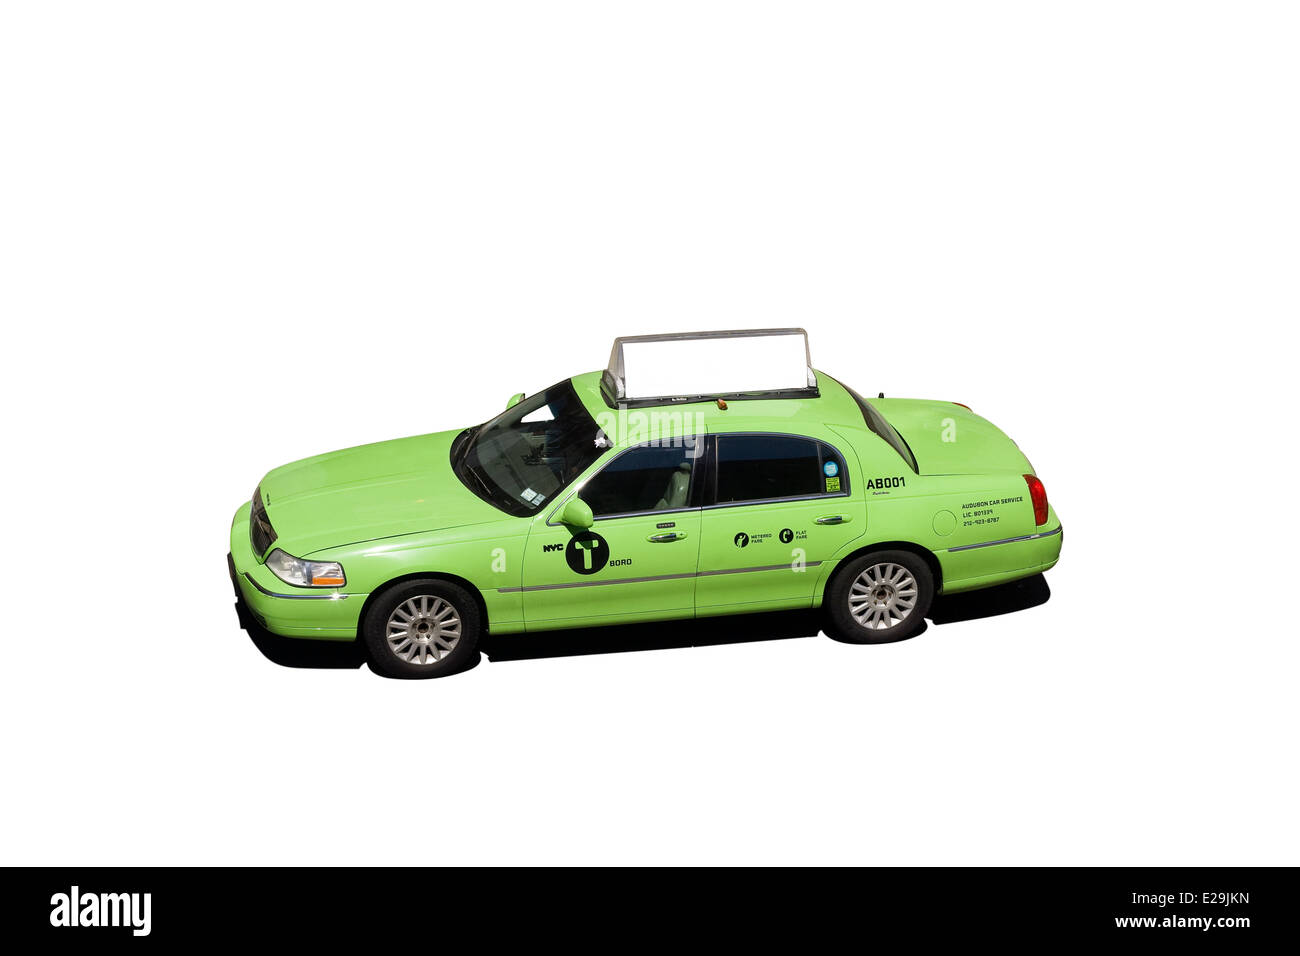 Cut Out. A Lincoln Town Car 4 Door Sedan converted to a New York City green Taxi Cab on white background (FRX222 without shadow) Stock Photo